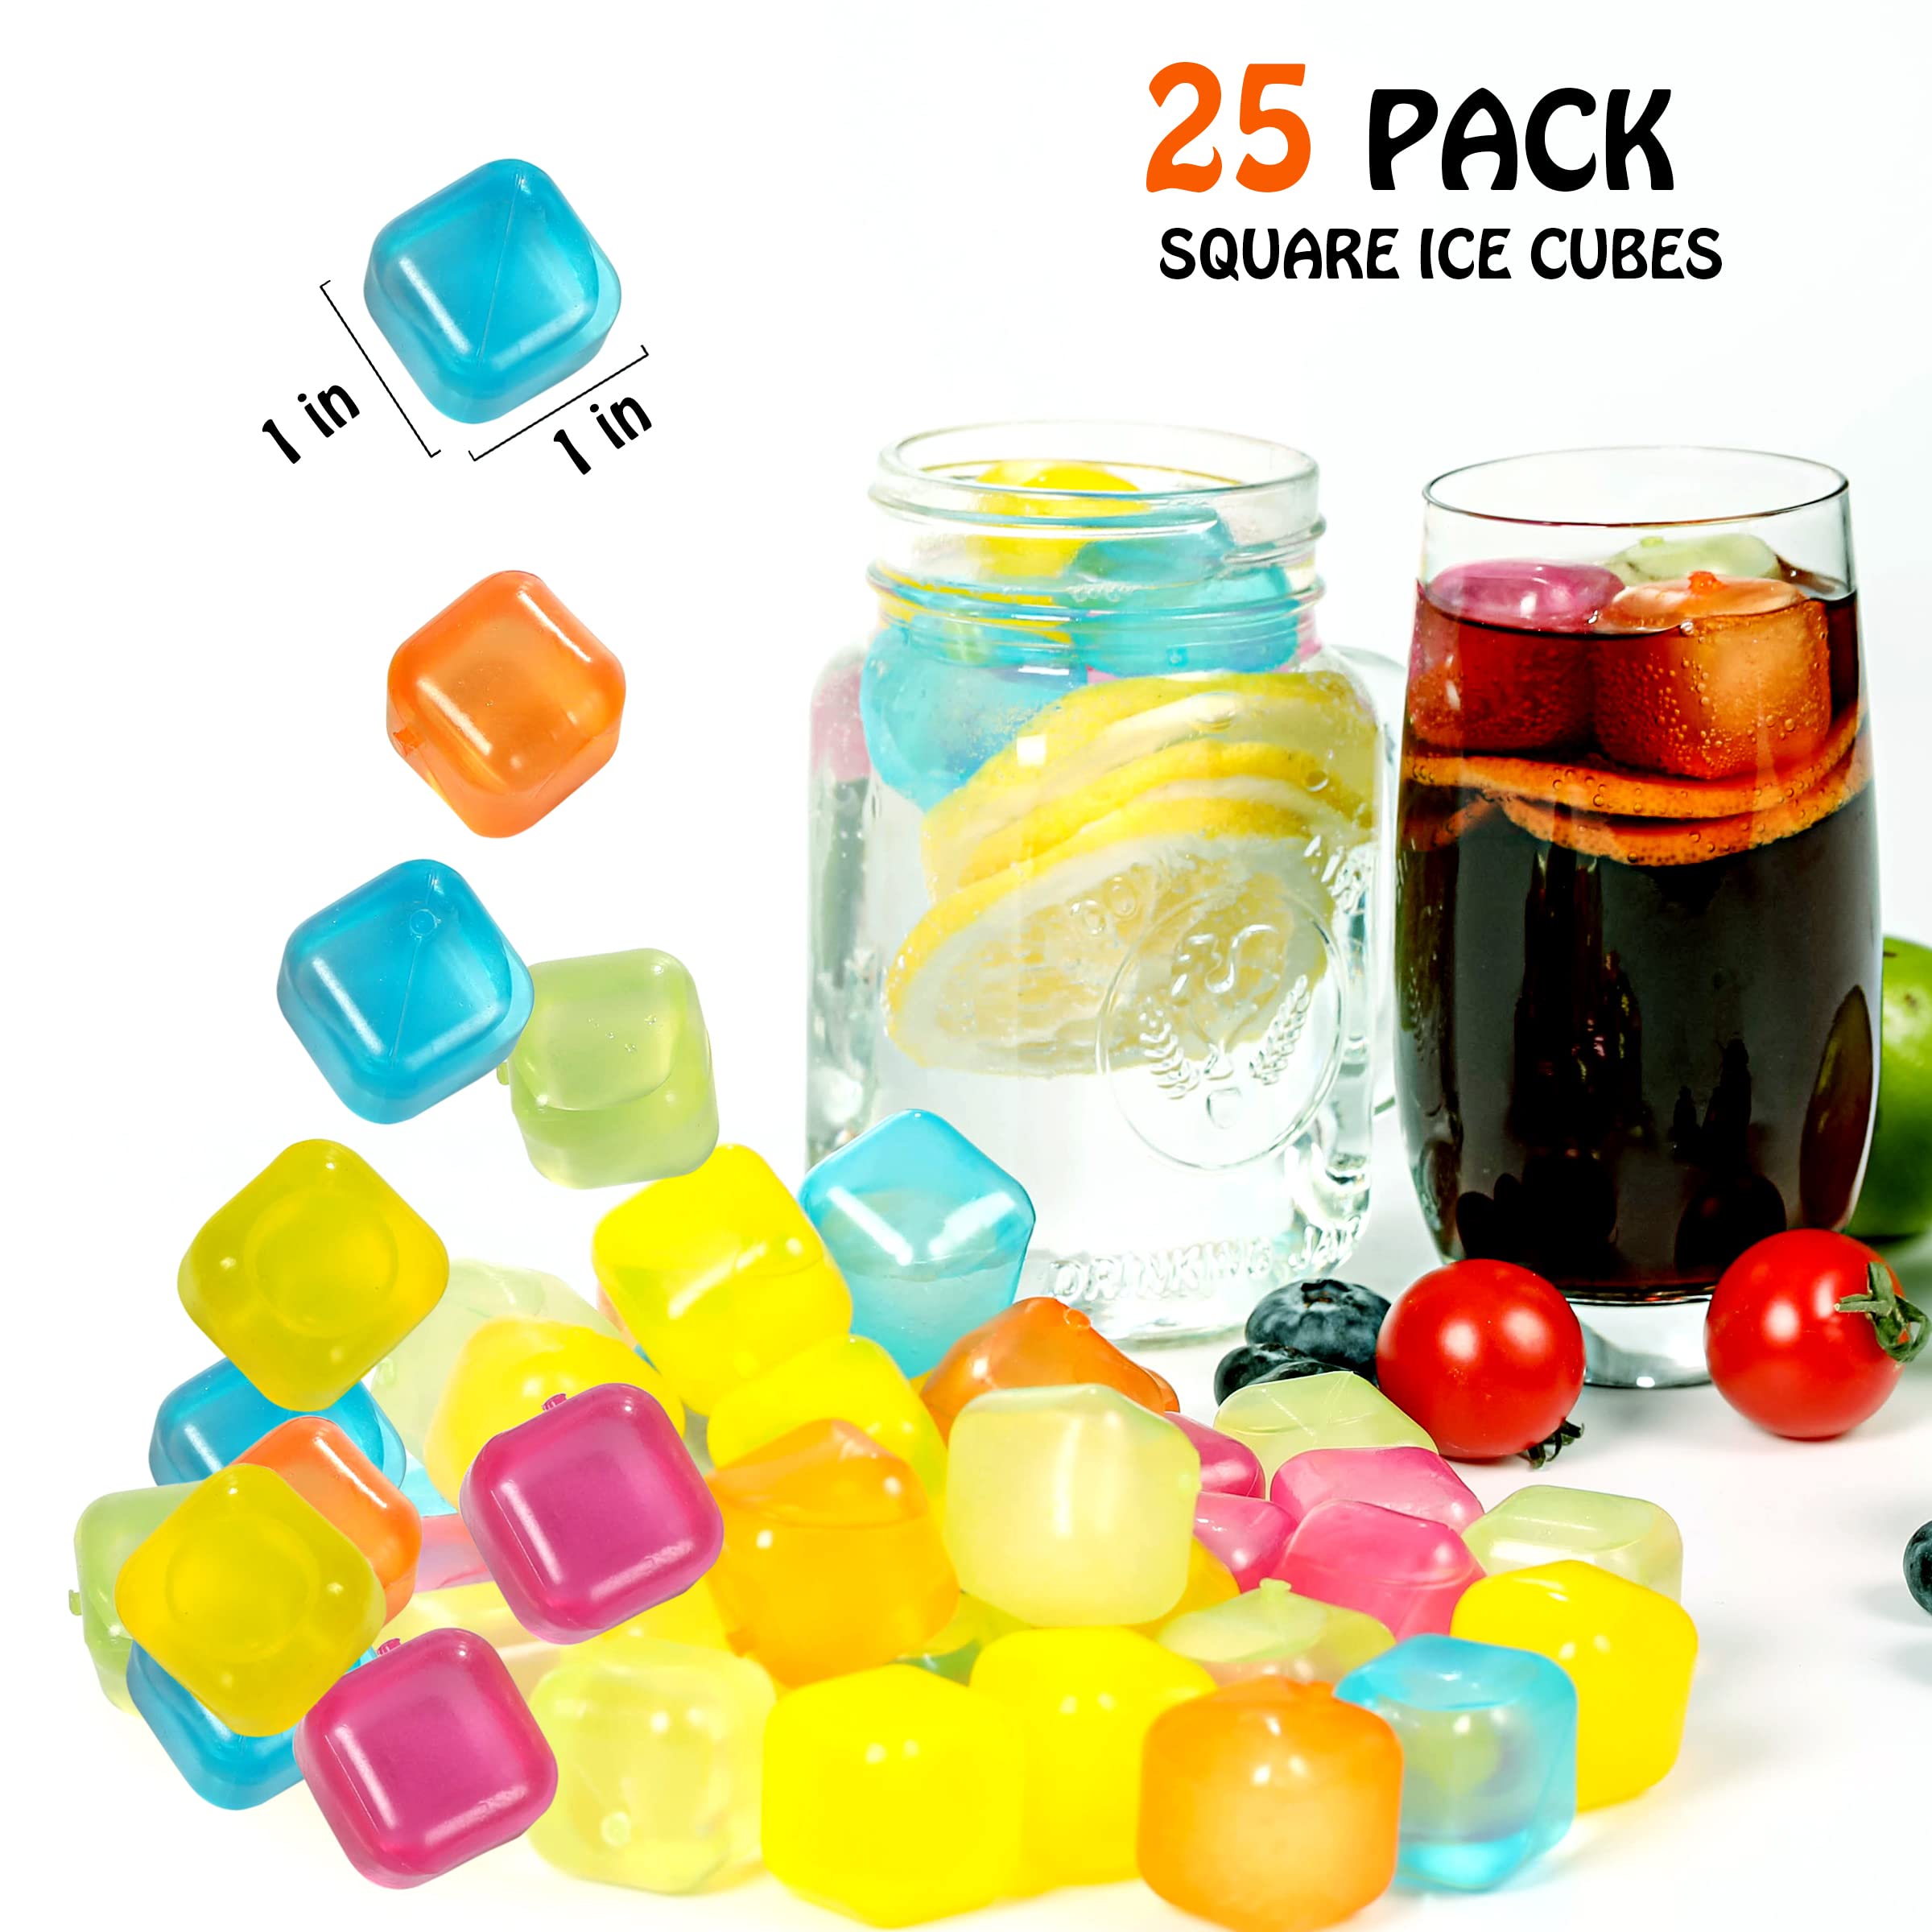 Reusable Plastic Ice Cubes 25 Pack Colorful Refreezable Ice Cubes for drinks, Whiskey, Vodka or Coffee, Washable Non-Melting Ice Cubes Non-Diluting